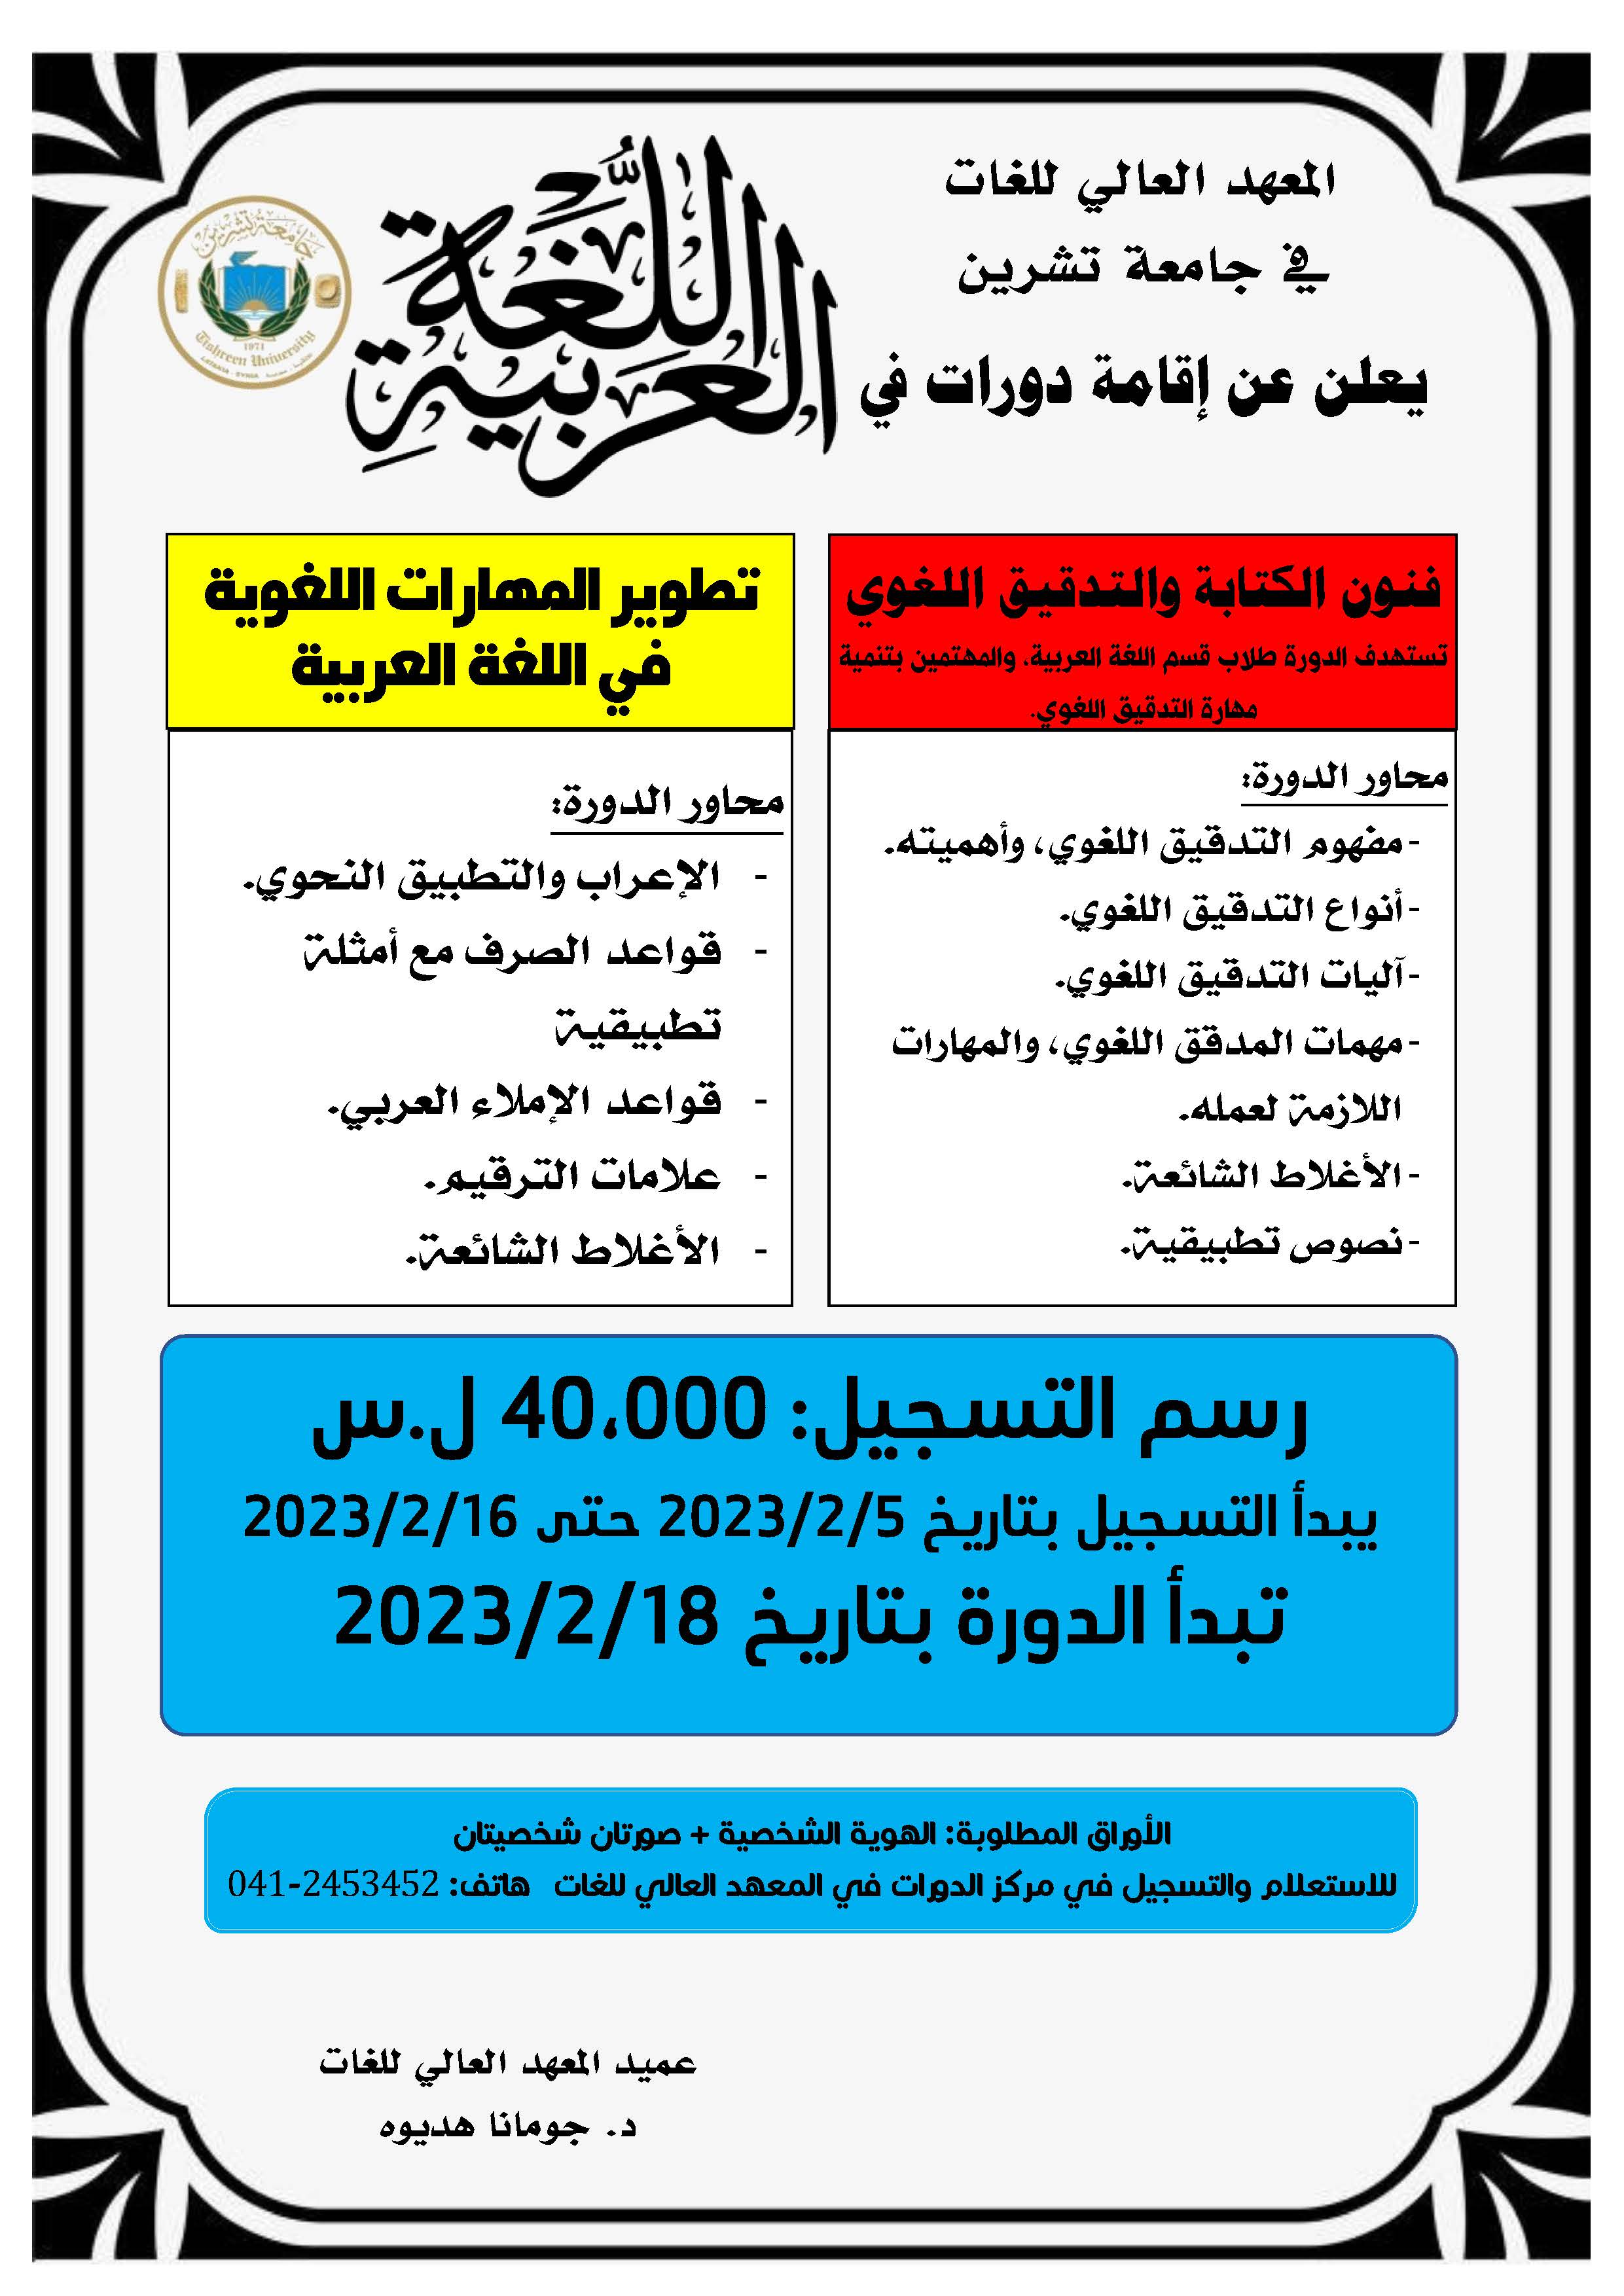 The Higher Institute of Languages ​​announces the establishment of courses in the Arabic language, starting on 2-18-2023